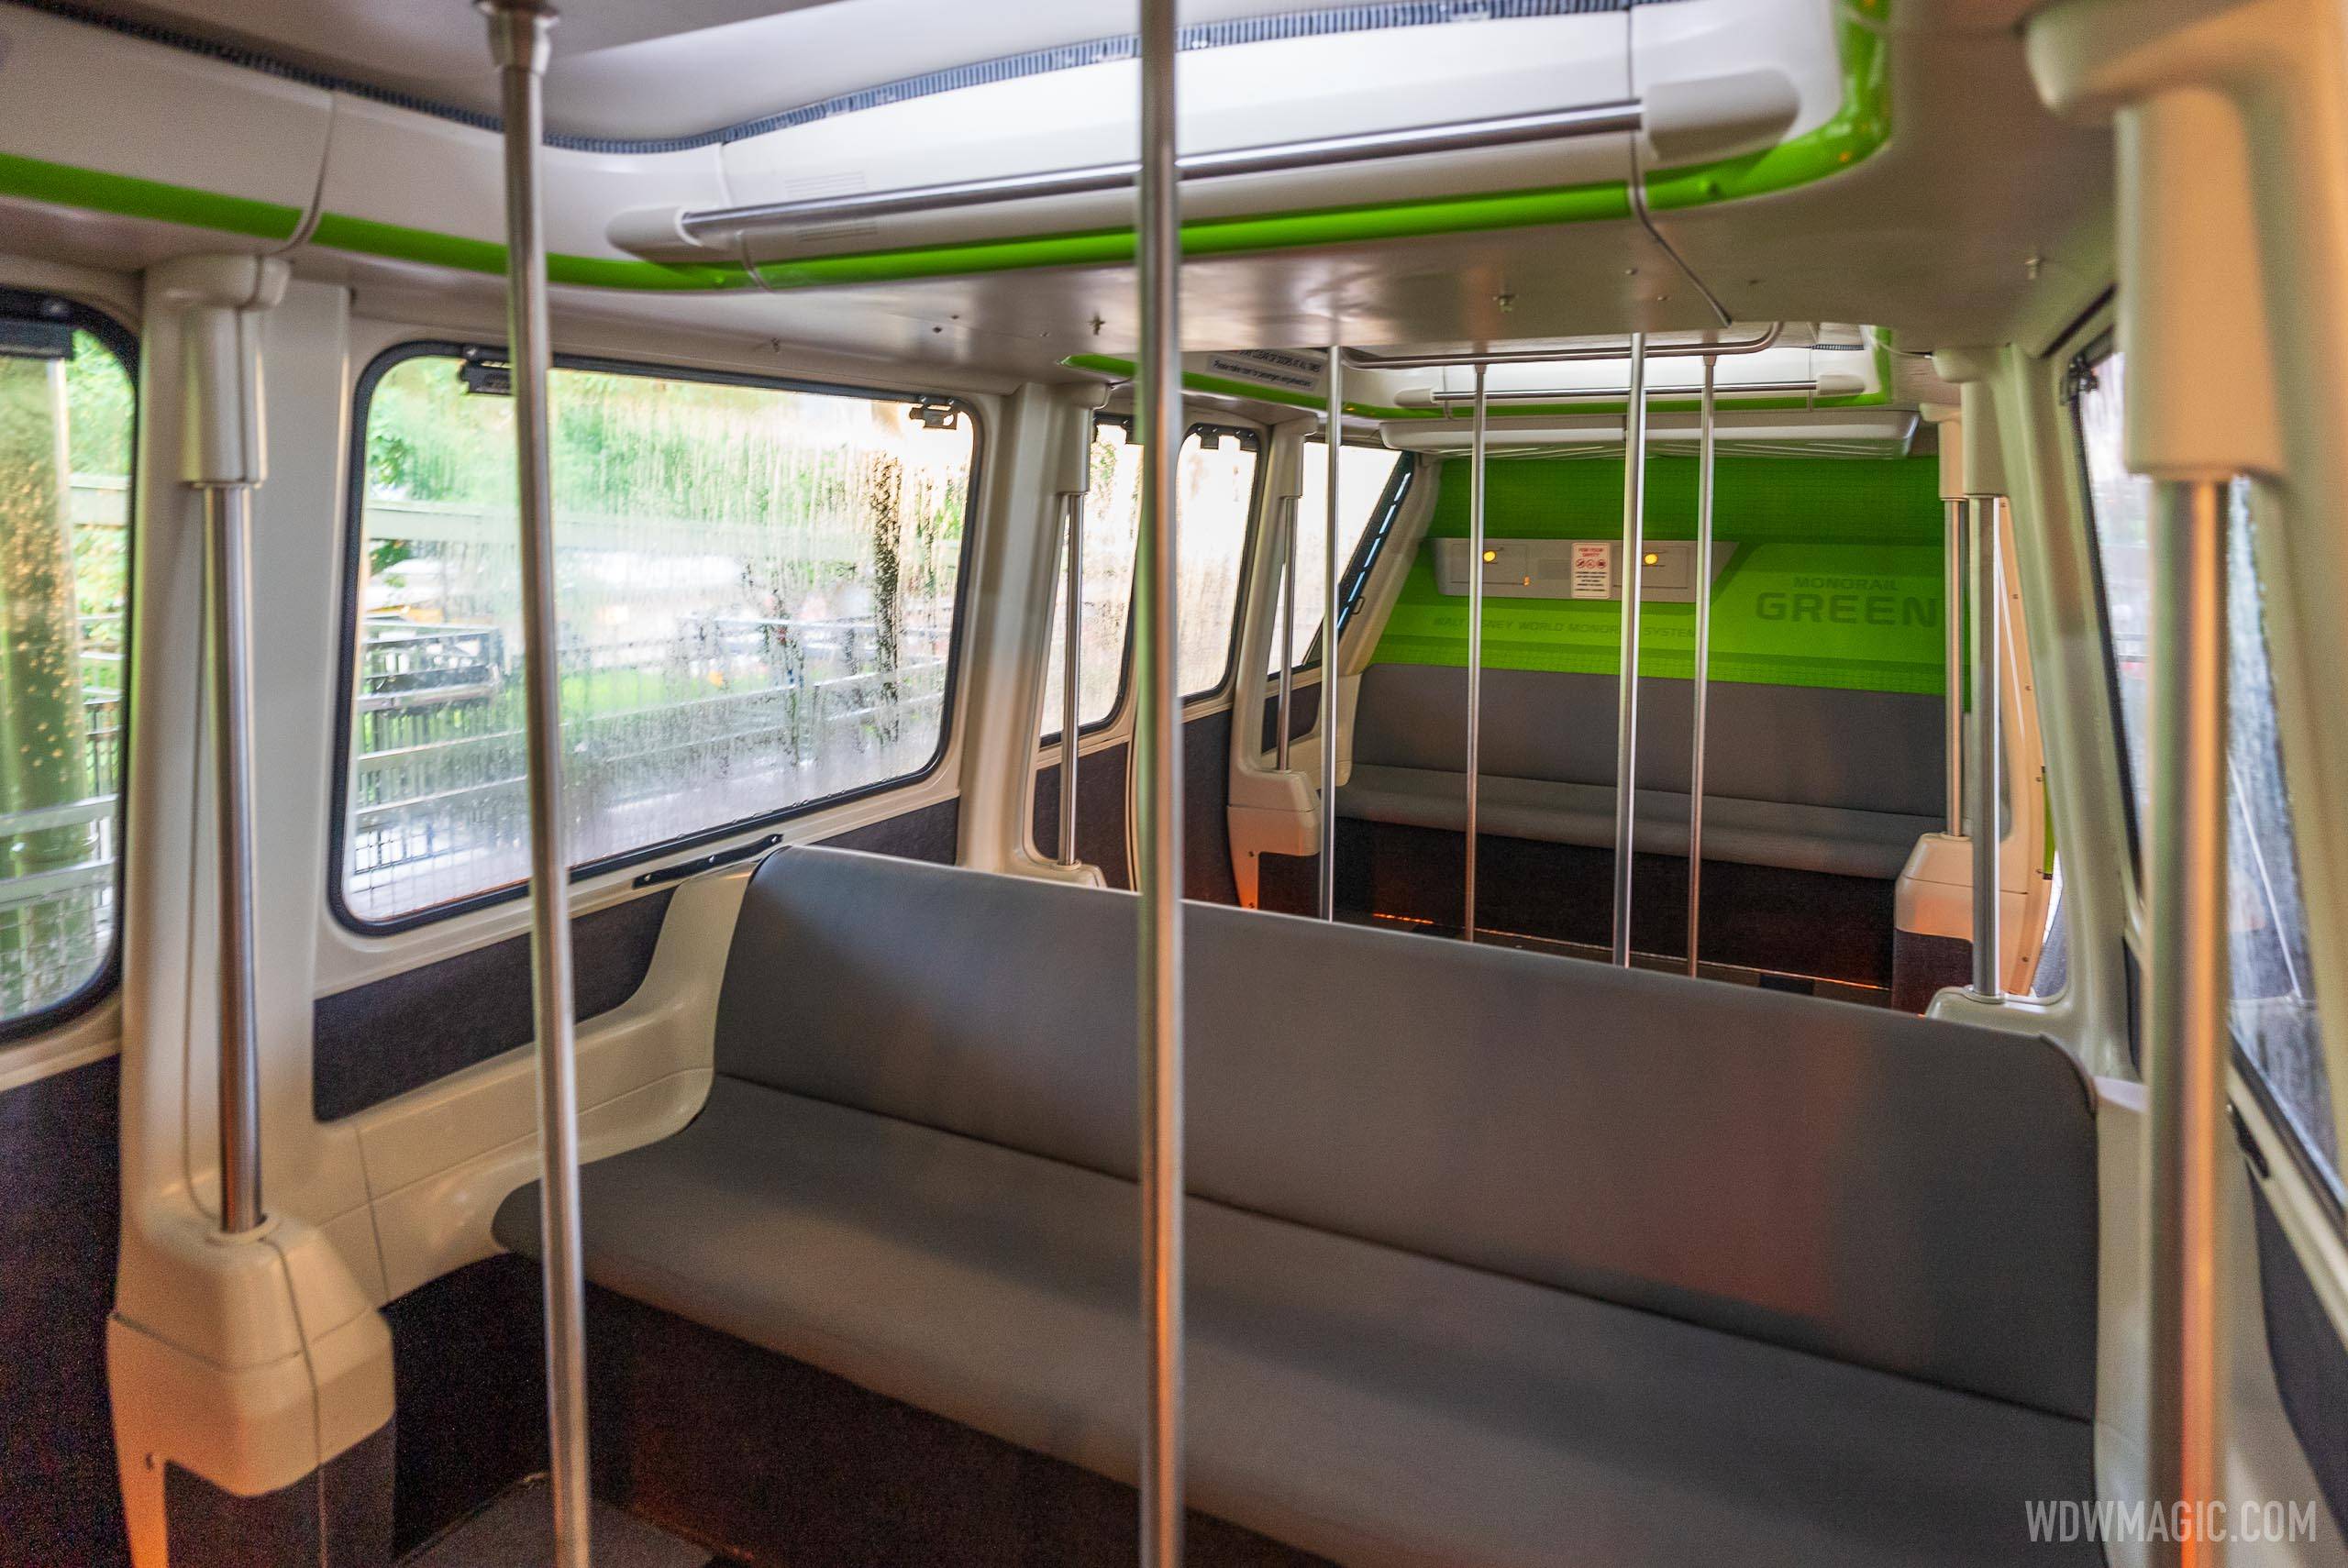 Plexiglass dividers removed from the monorails